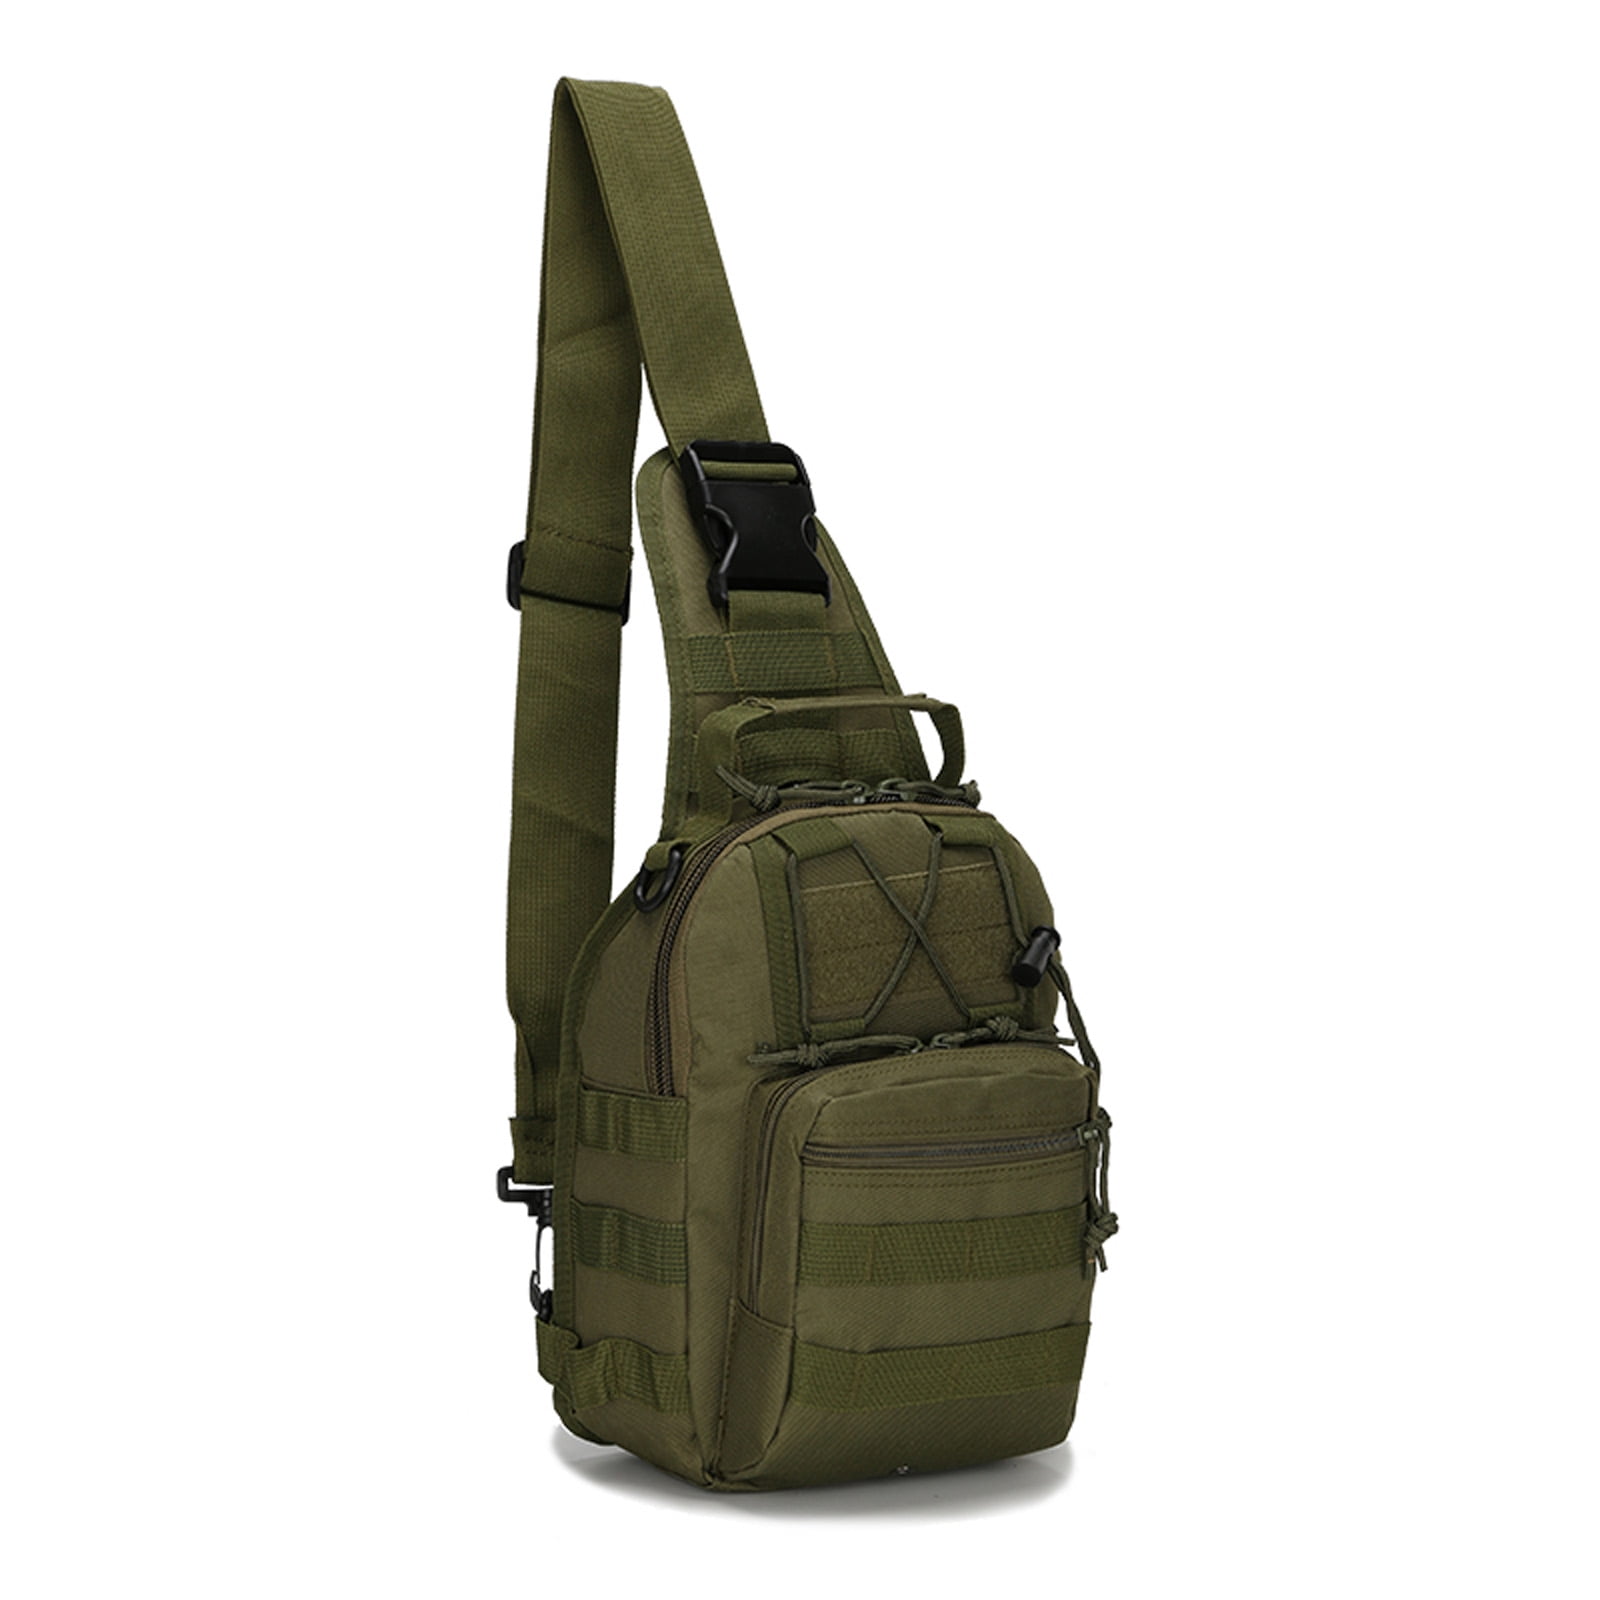 CAMO Backpack Rucksack Camouflage Cool Army Camping School Gym Goth Travel Bag 